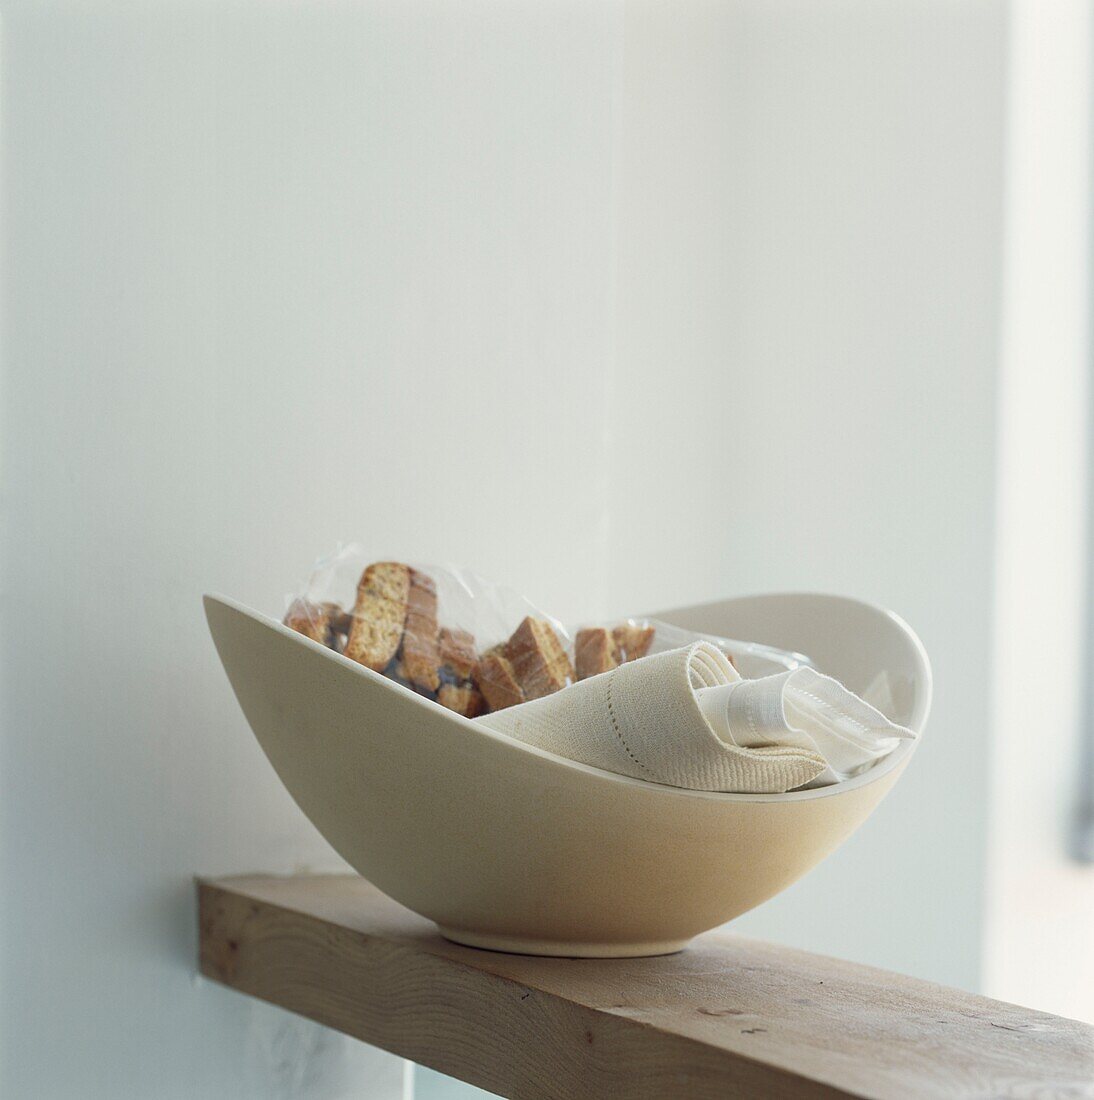 Confectionary and napkins in white bowl on wooden shelf